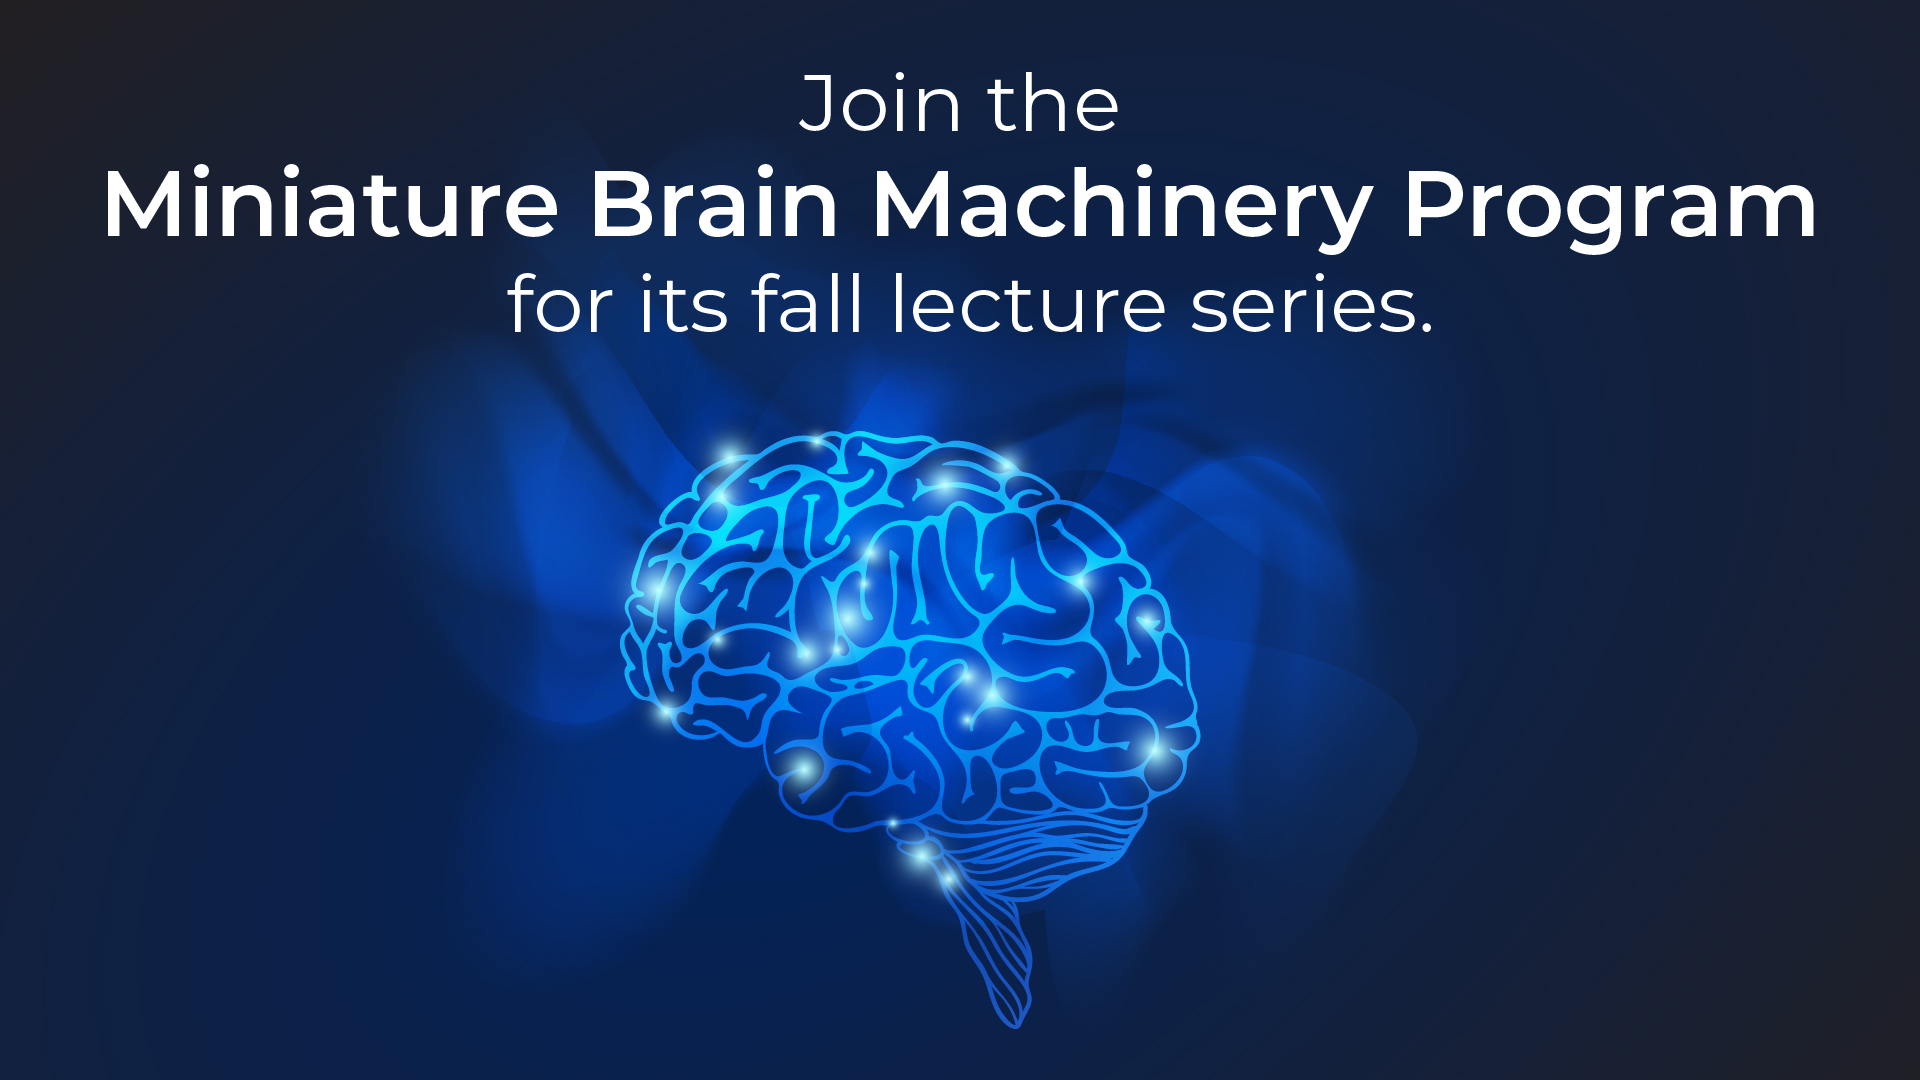 Text reading: "Join the Miniature Brain Machinery Program for its fall lecture series" is positioned above a futuristic graphic of a human brain.